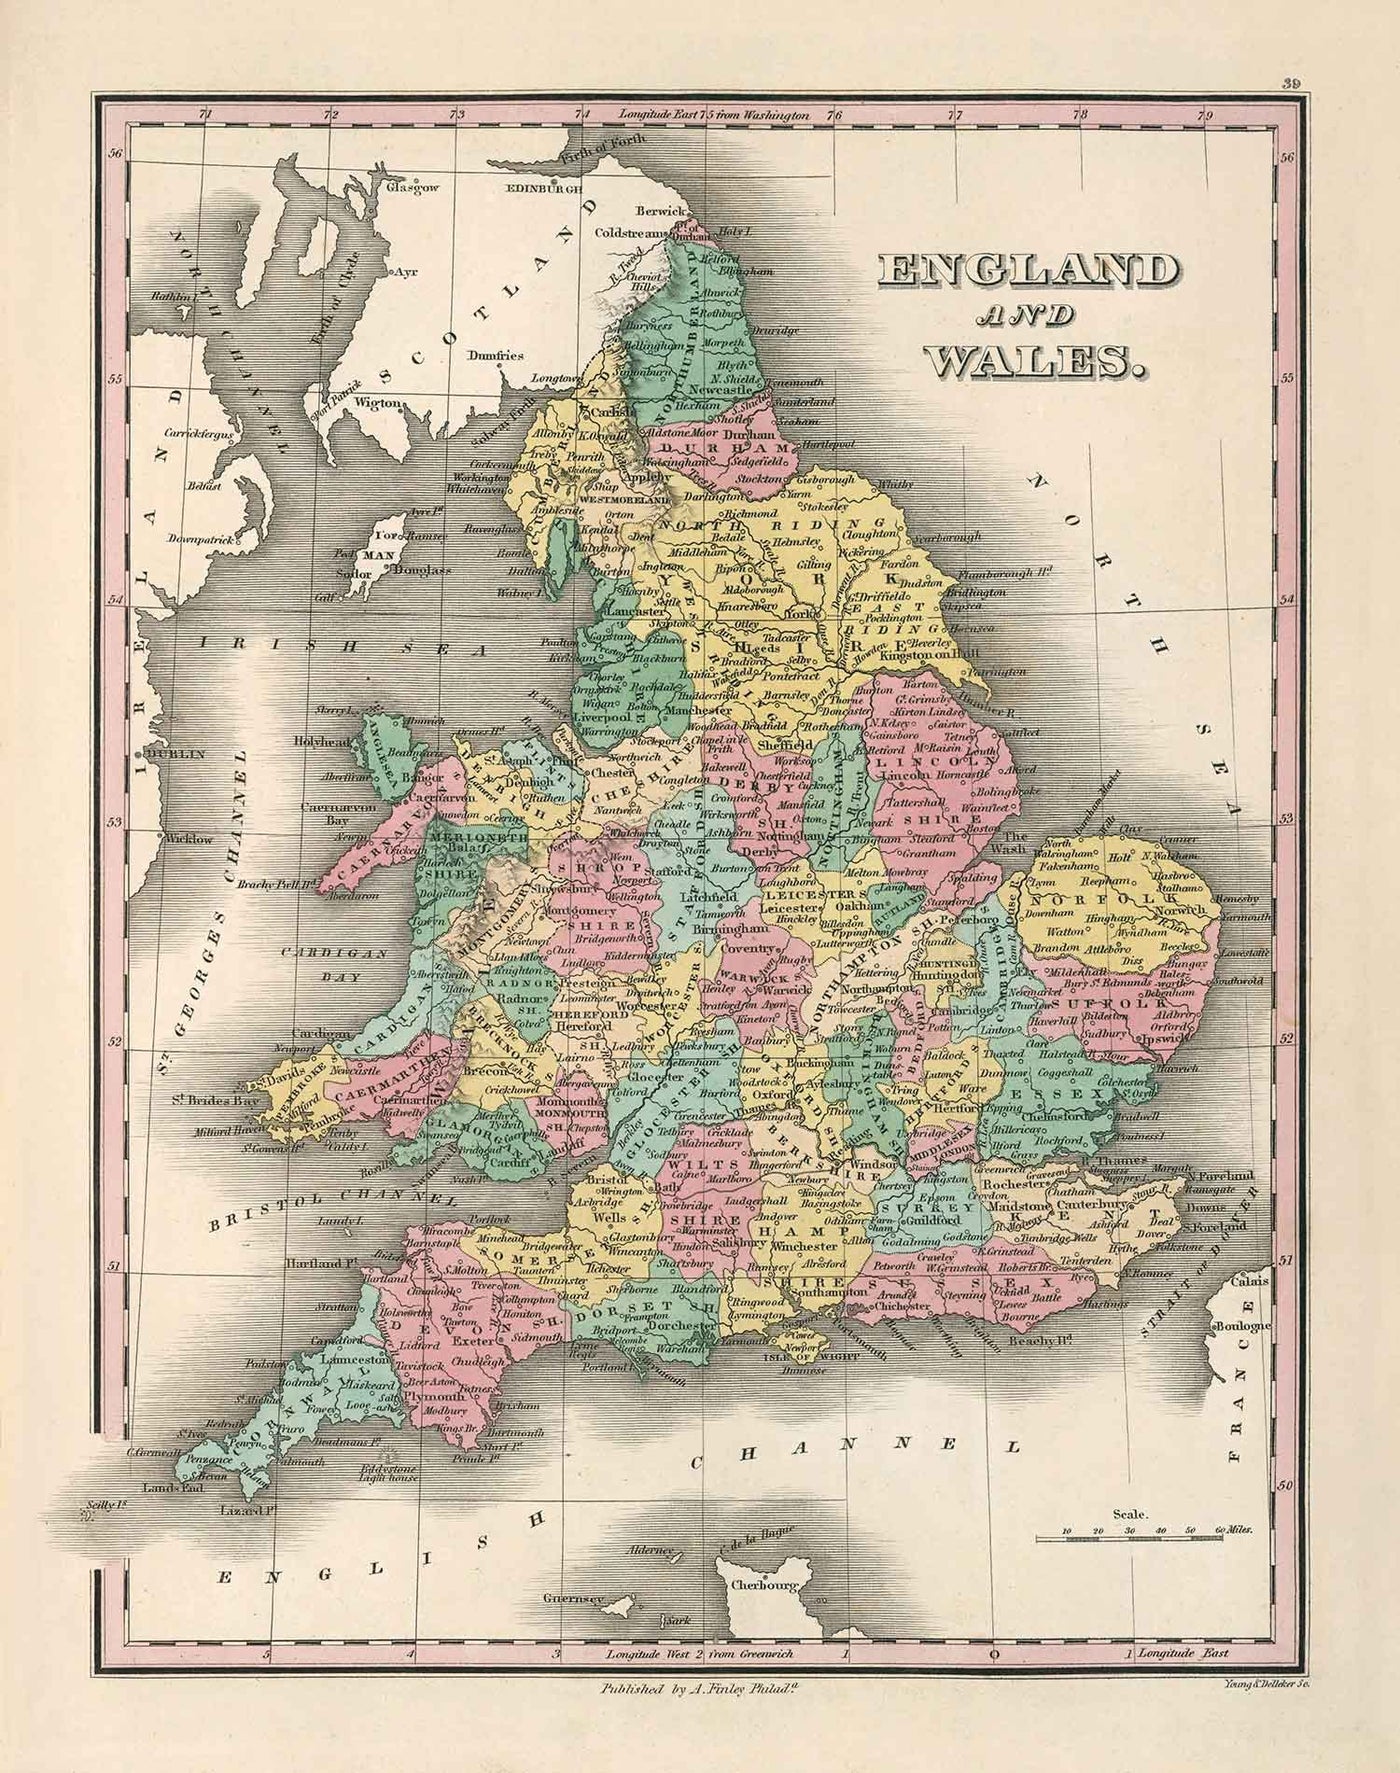 Old Map of Counties in England & Wales, 1827 - Historic County Map - Westmoreland, Sussex, Rutland